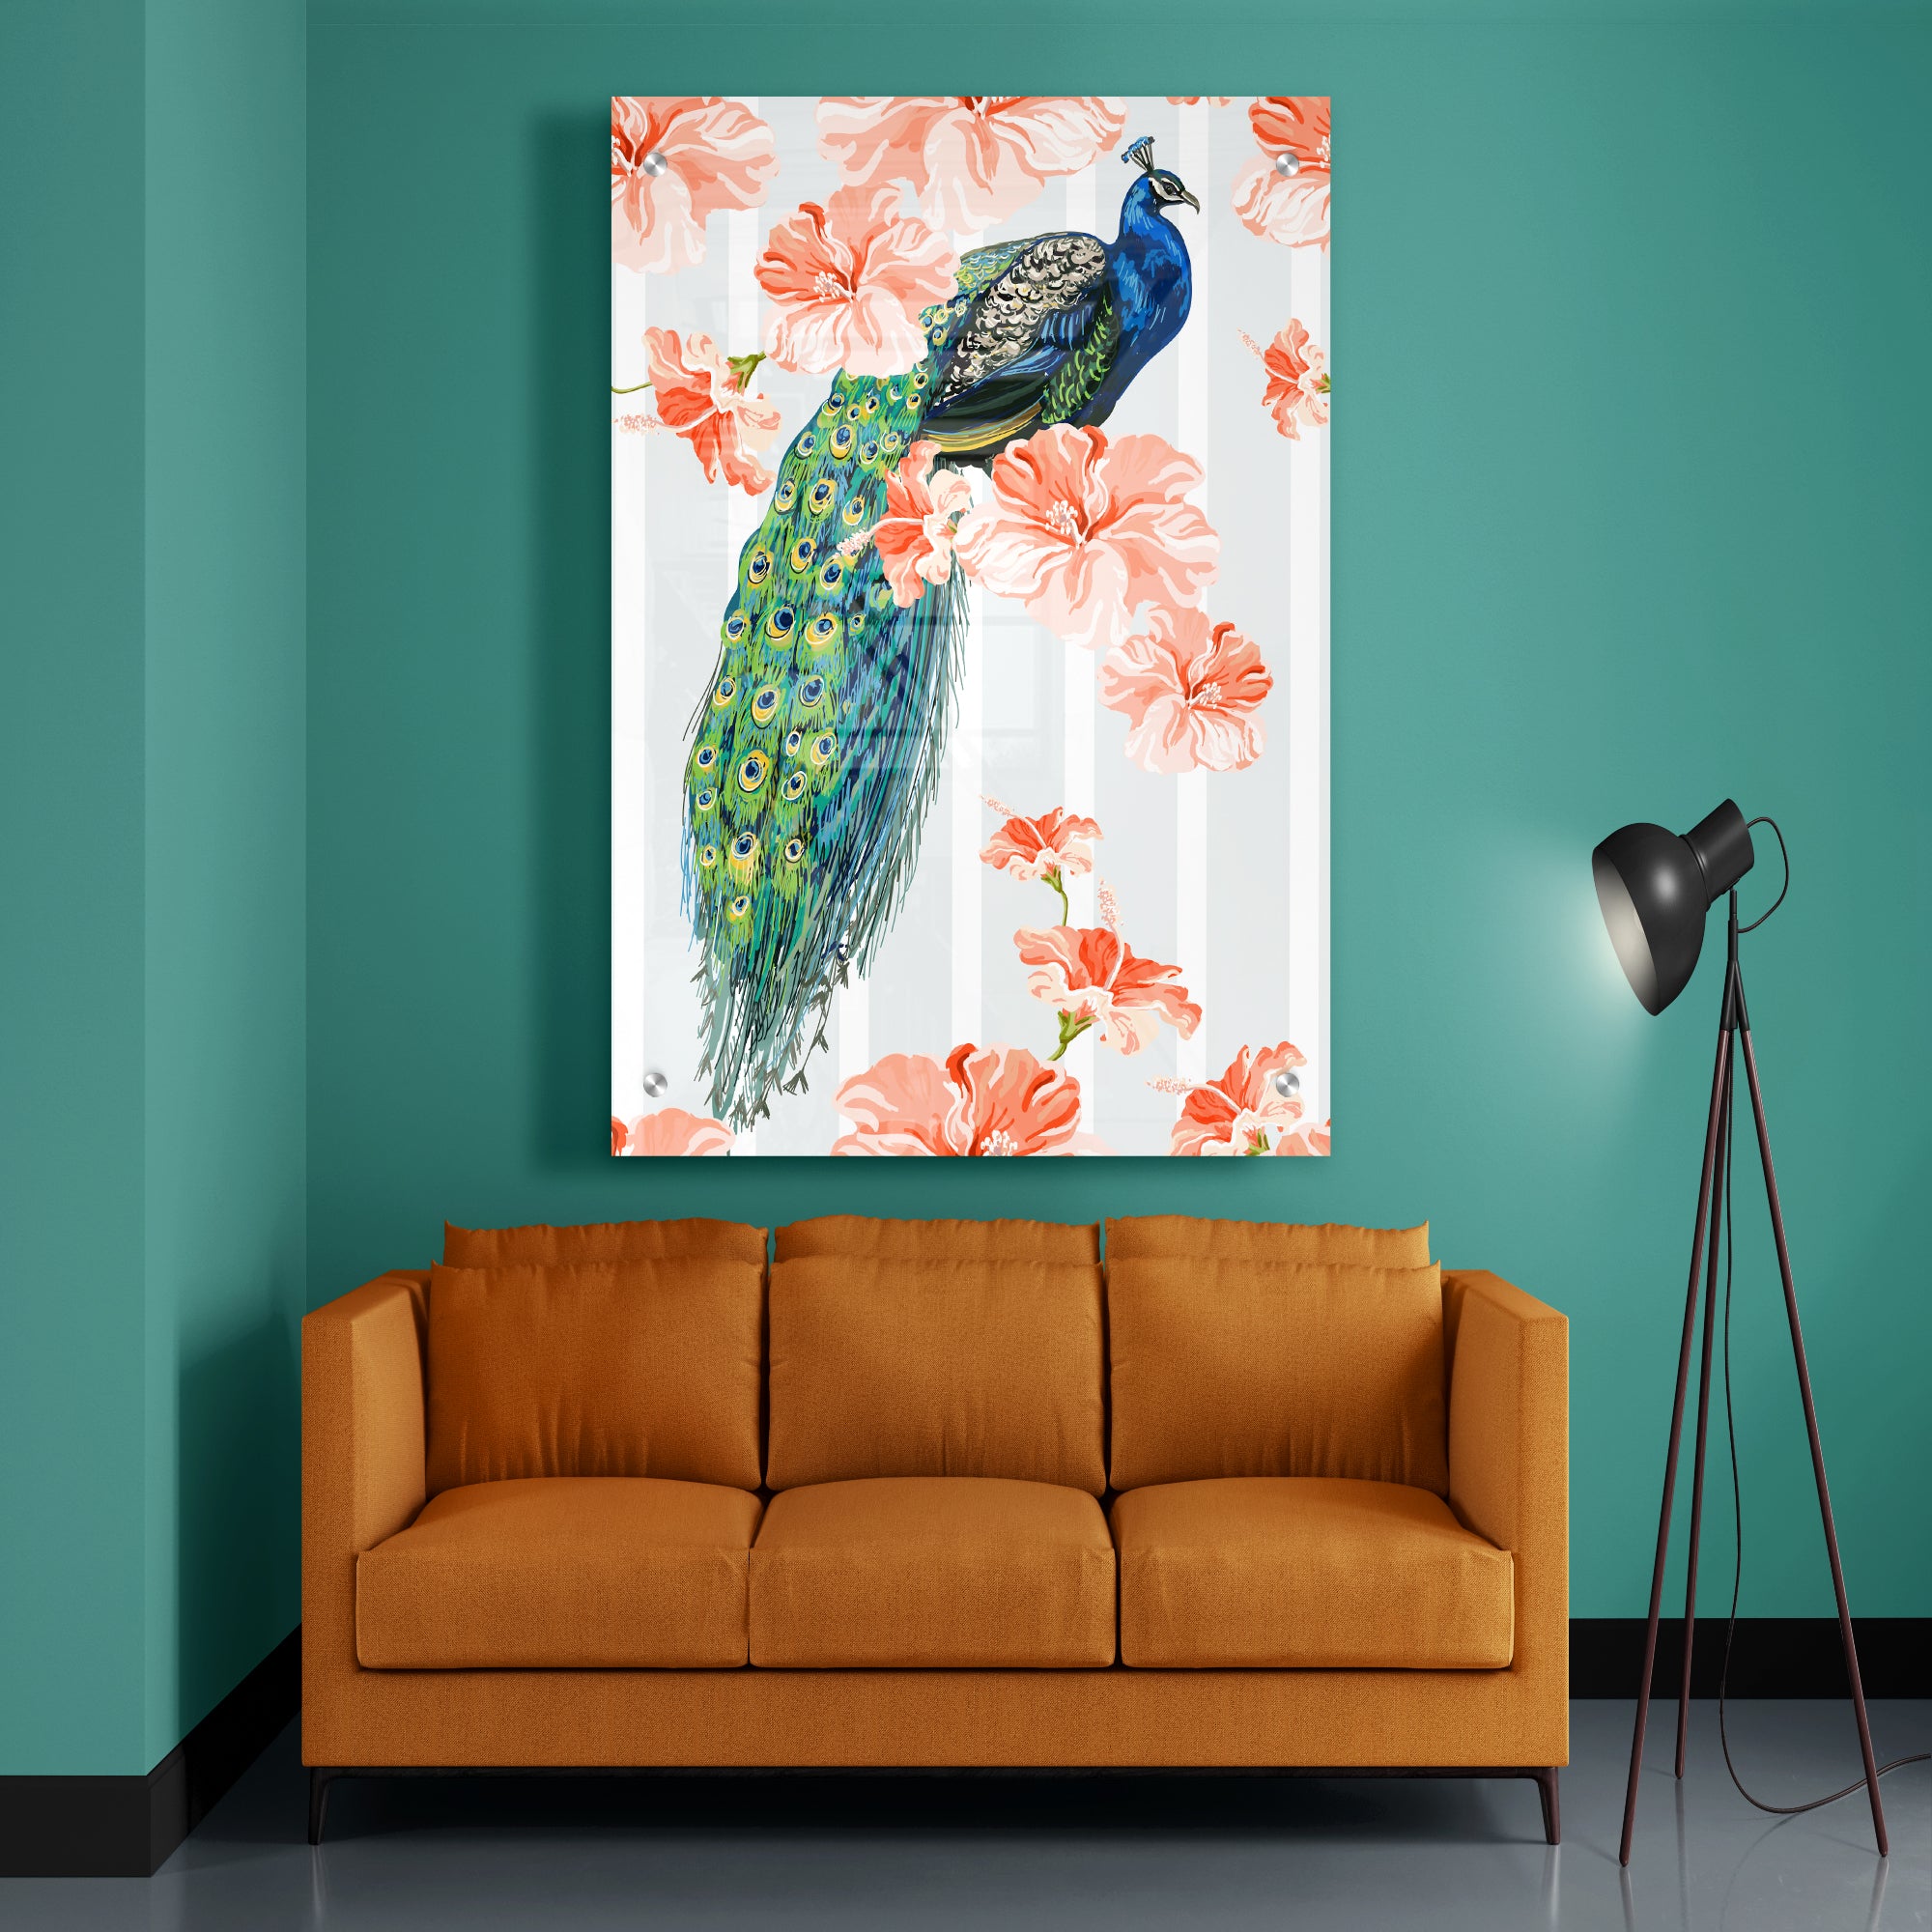 Beautiful Flower With Peacock Acrylic Wall Painting